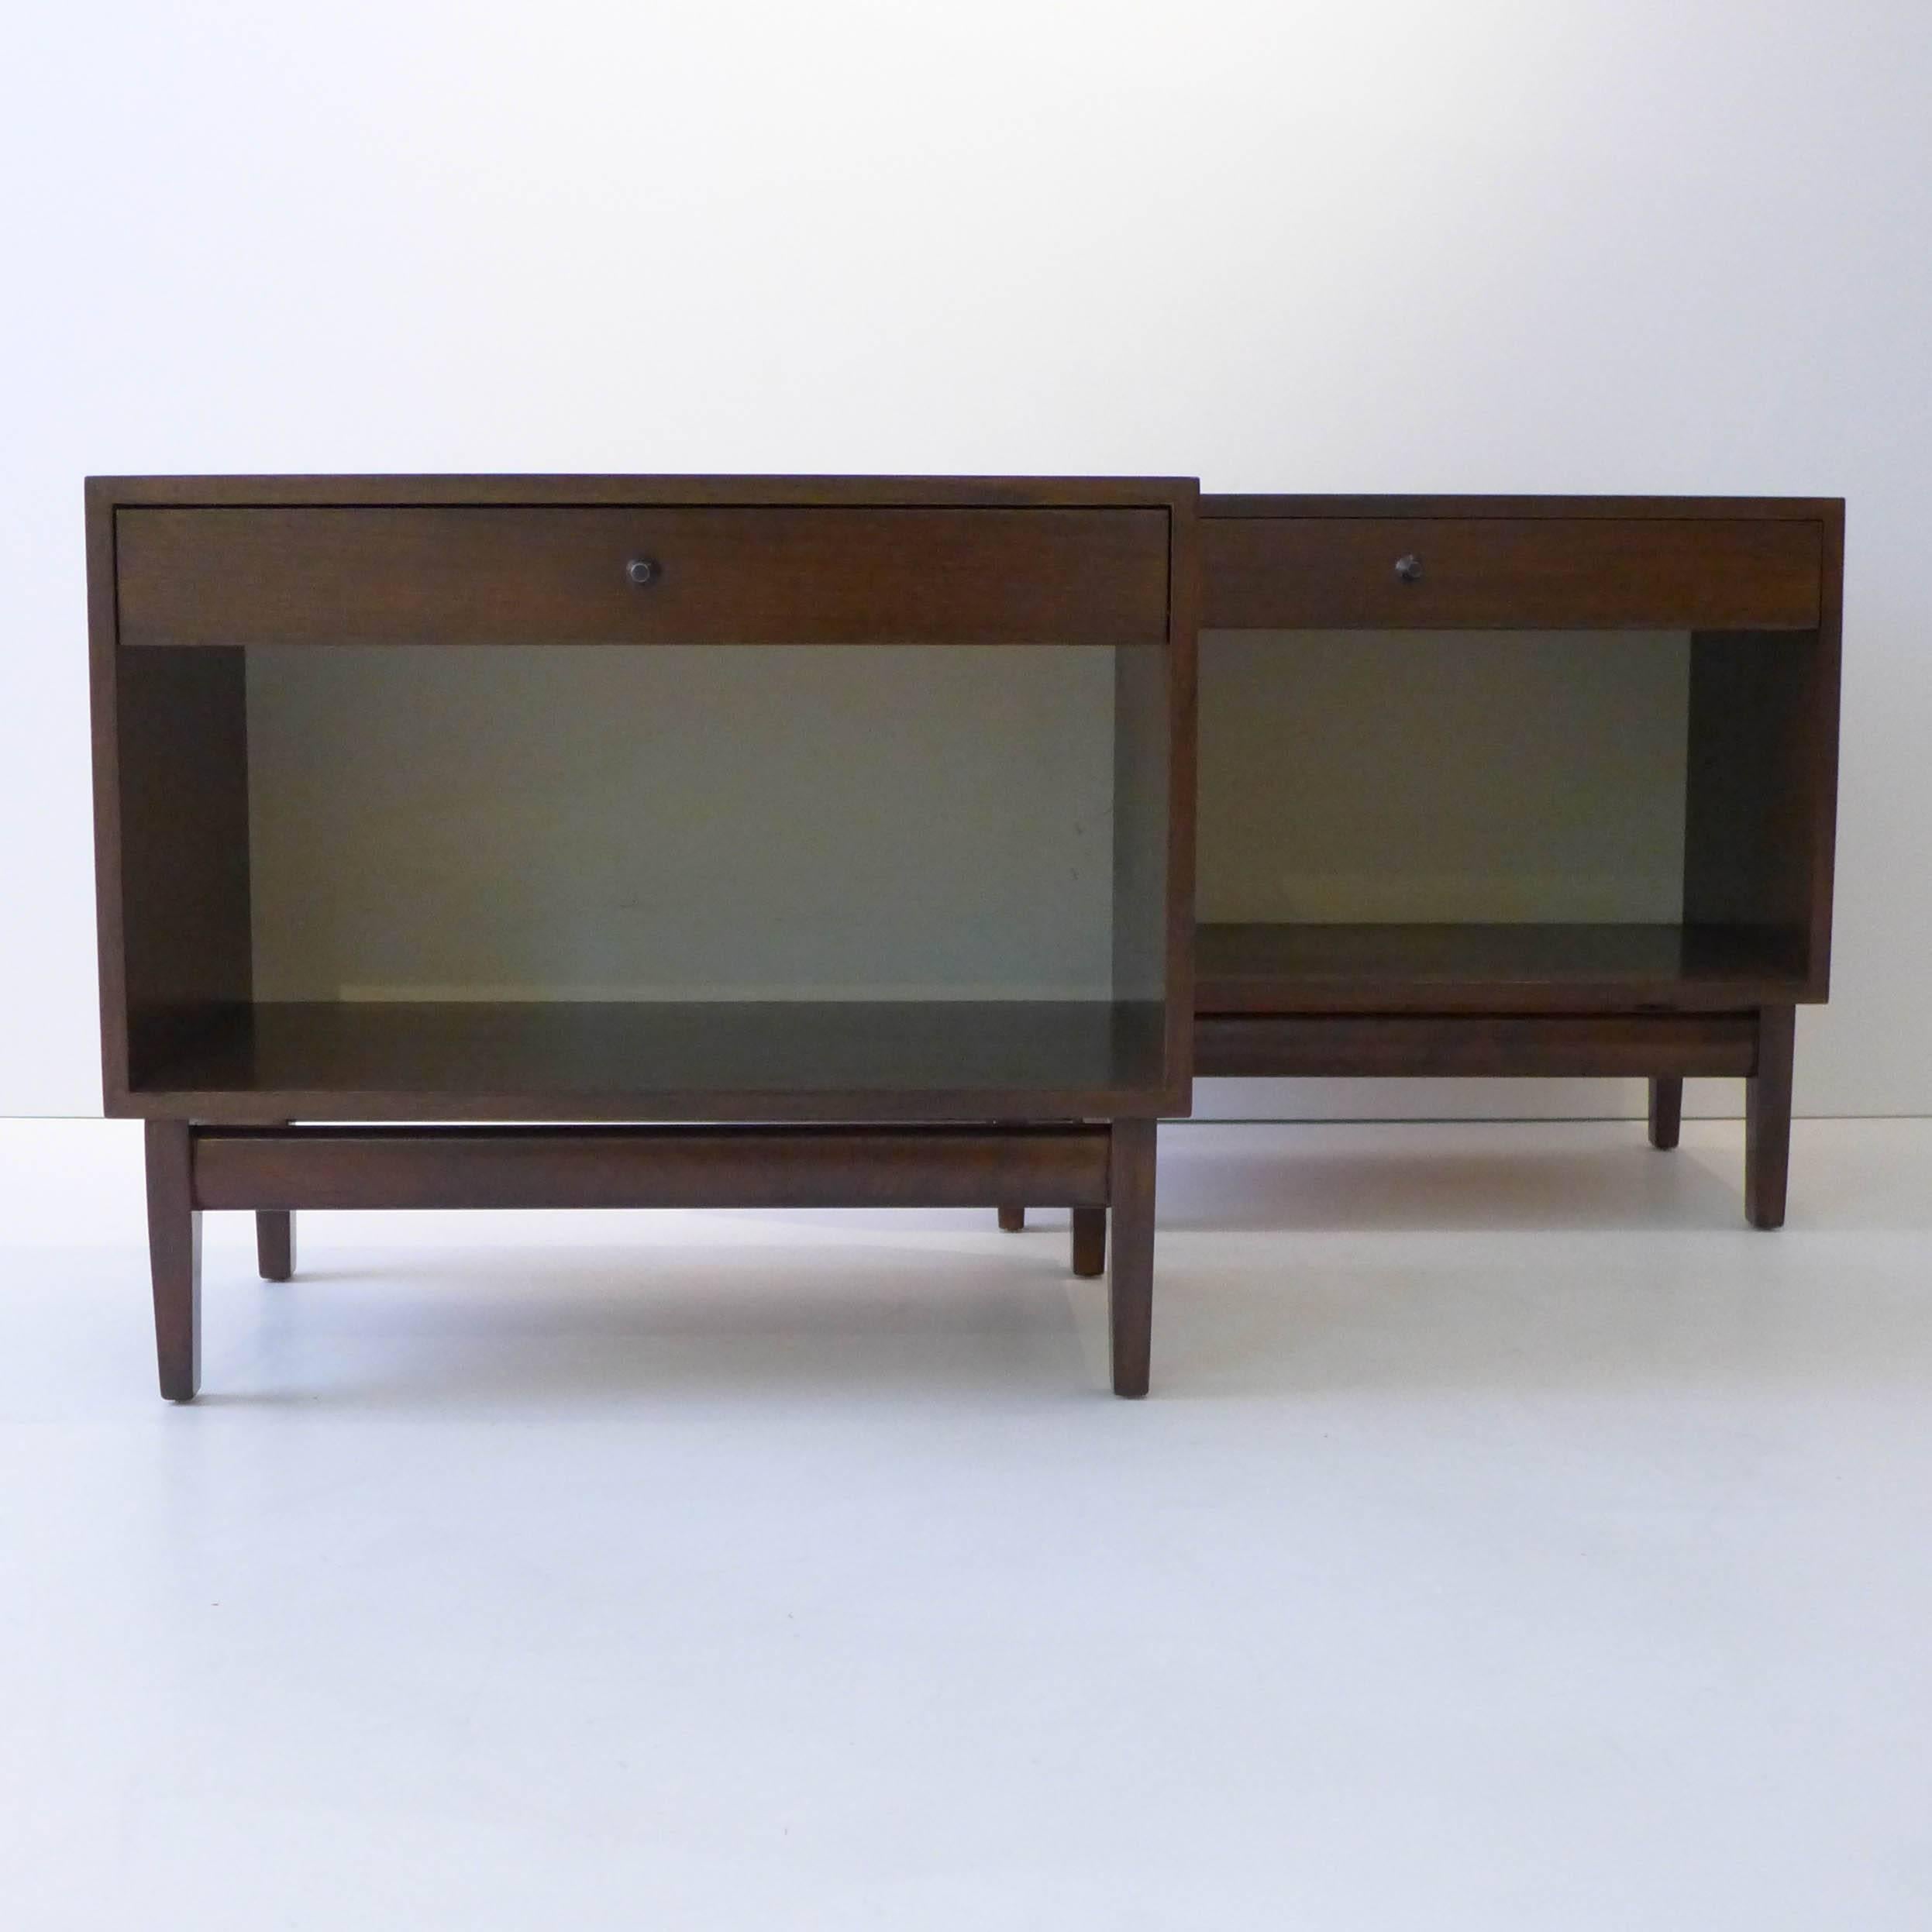 Pair of nightstands of walnut with white Micarta rear panels and painted metal pulls. Designed most likely by Kipp Stewart as part of his American Design Foundation line for Calvin Furniture, circa 1950s. With the original metal tag.